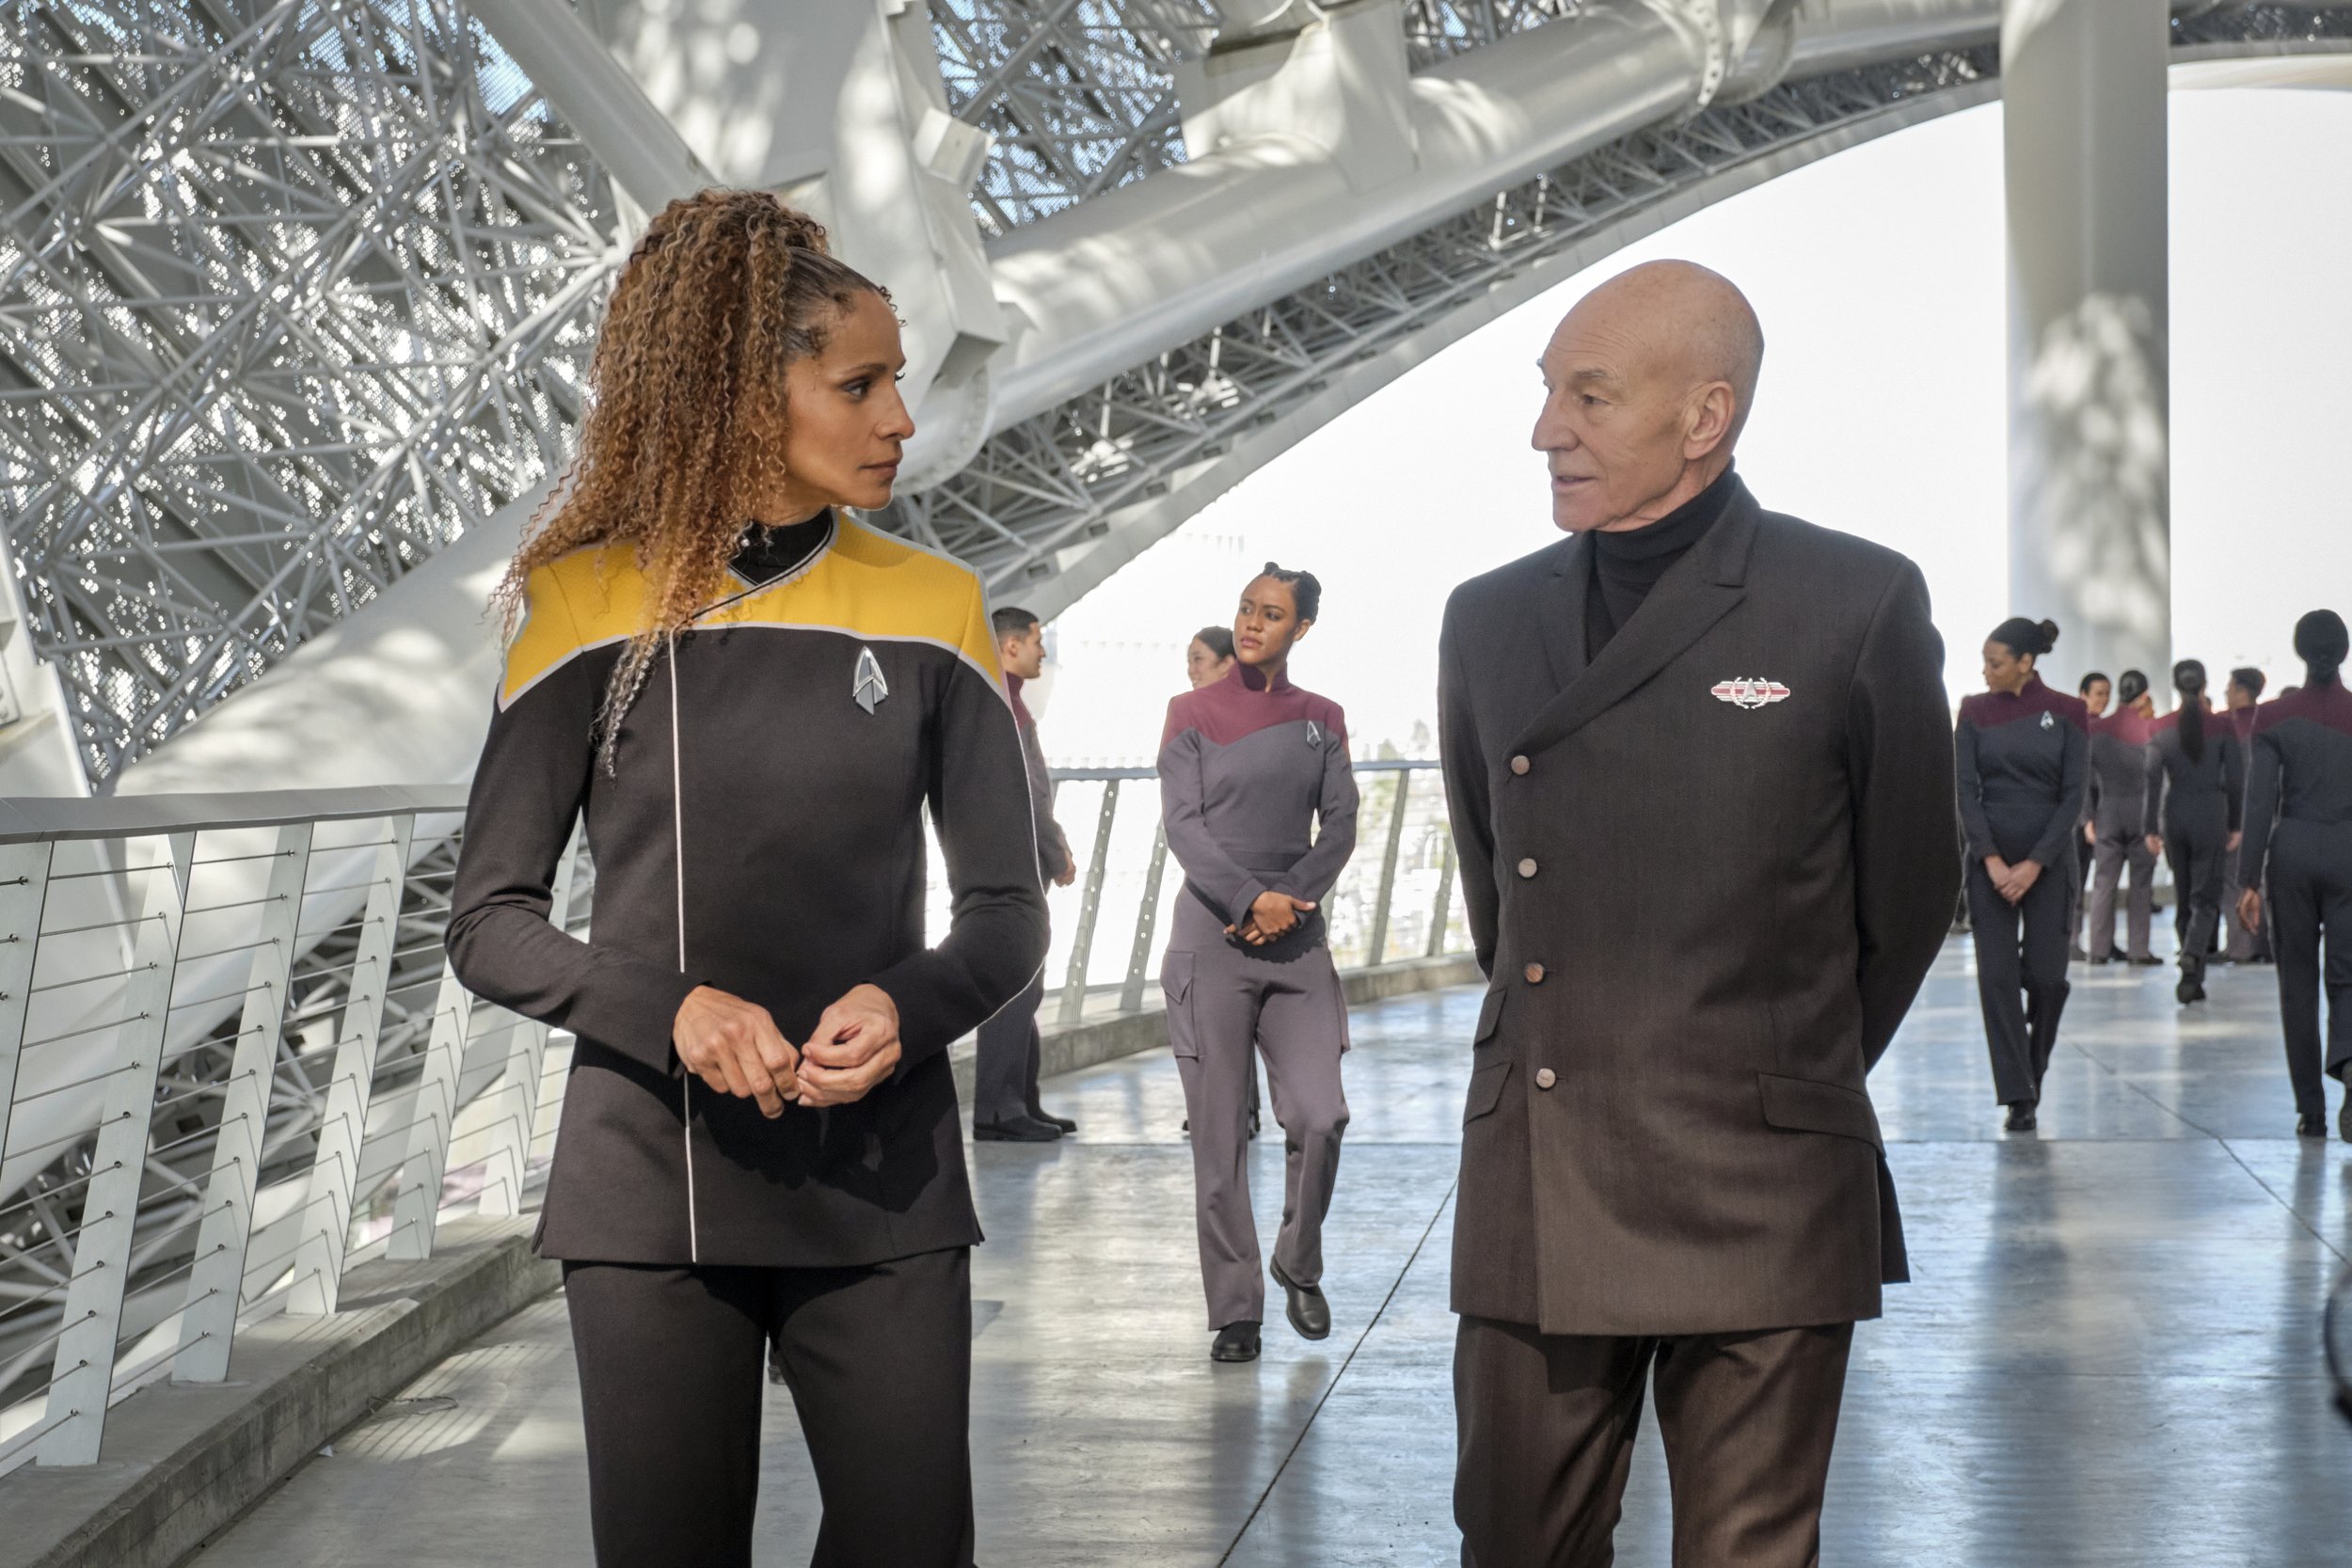   Pictured: Michelle Hurd as Raffi and Sir Patrick Stewart as Jean-Luc Picard of the Paramount+ original series STAR TREK: PICARD. Photo Cr: Trae Patton/Paramount+ (C)2022 ViacomCBS. All Rights Reserved.  